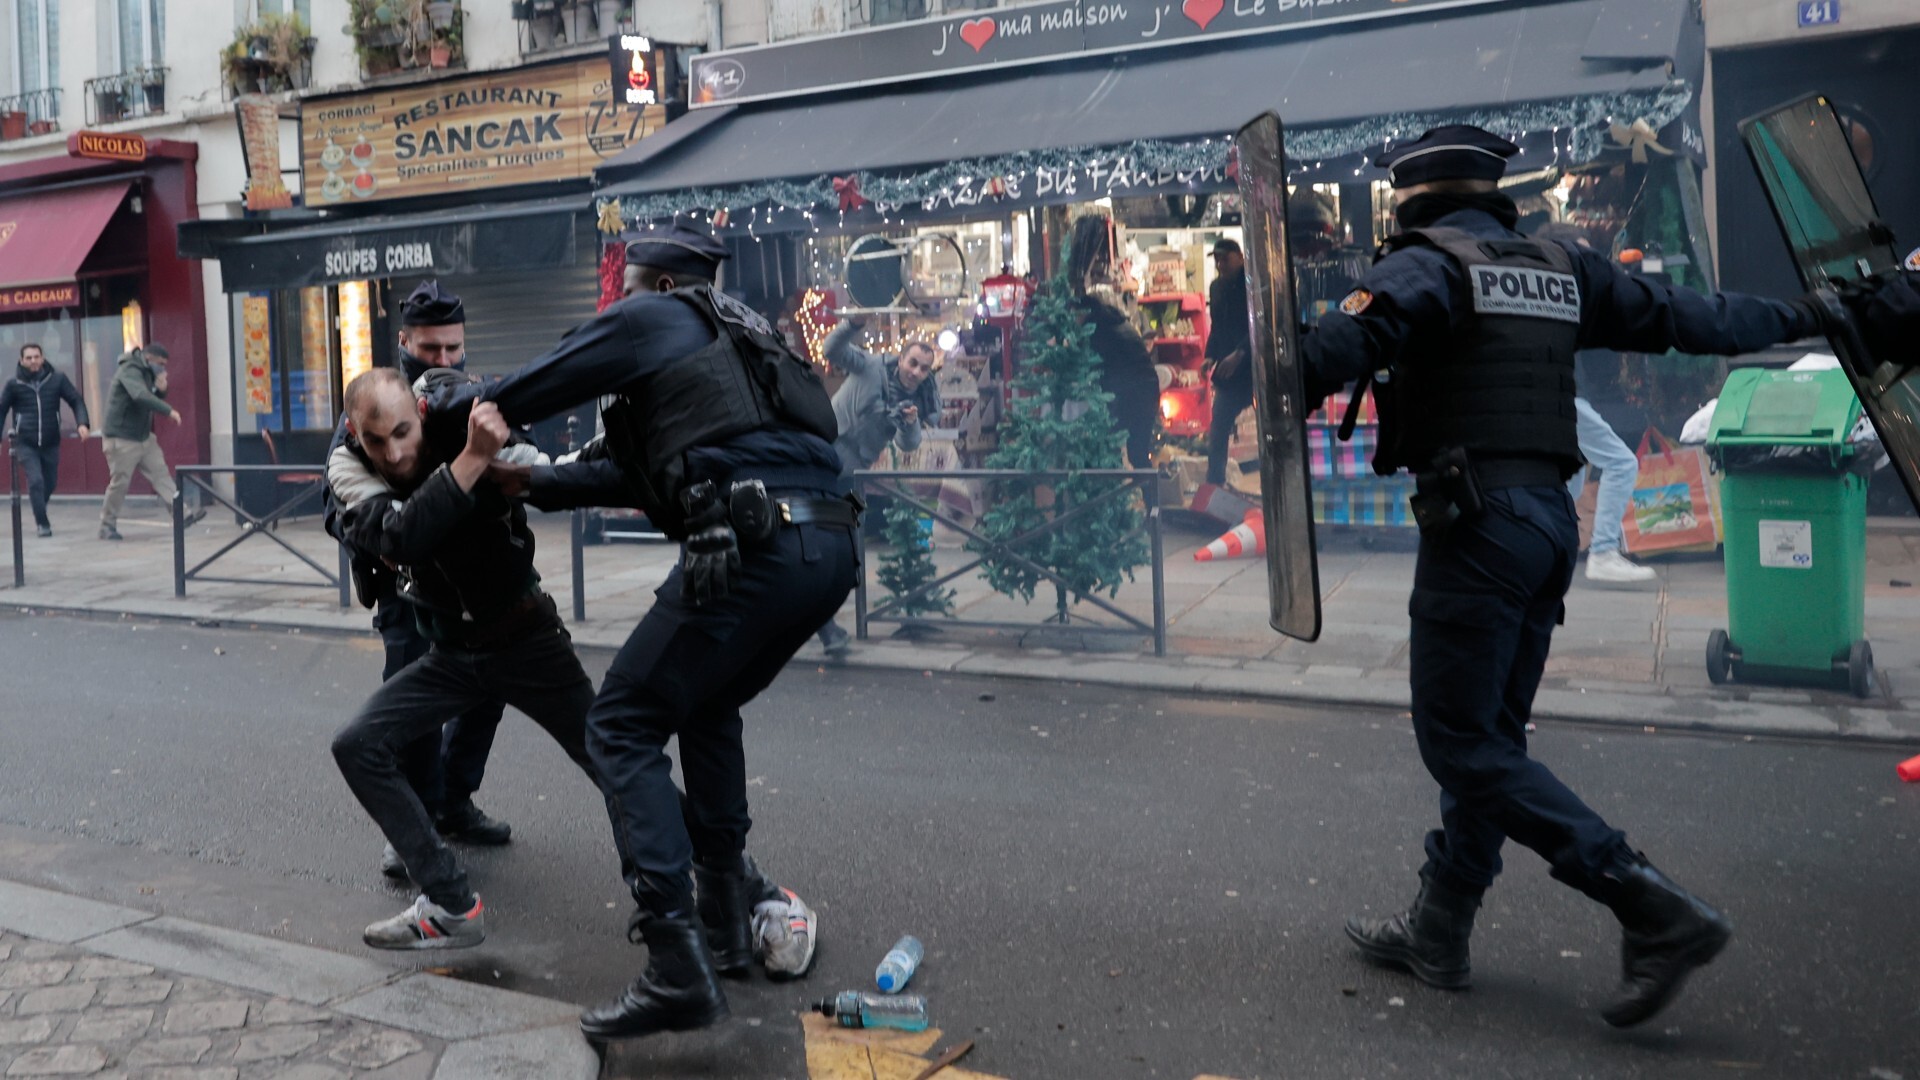 How has hate speech in France led to violence?